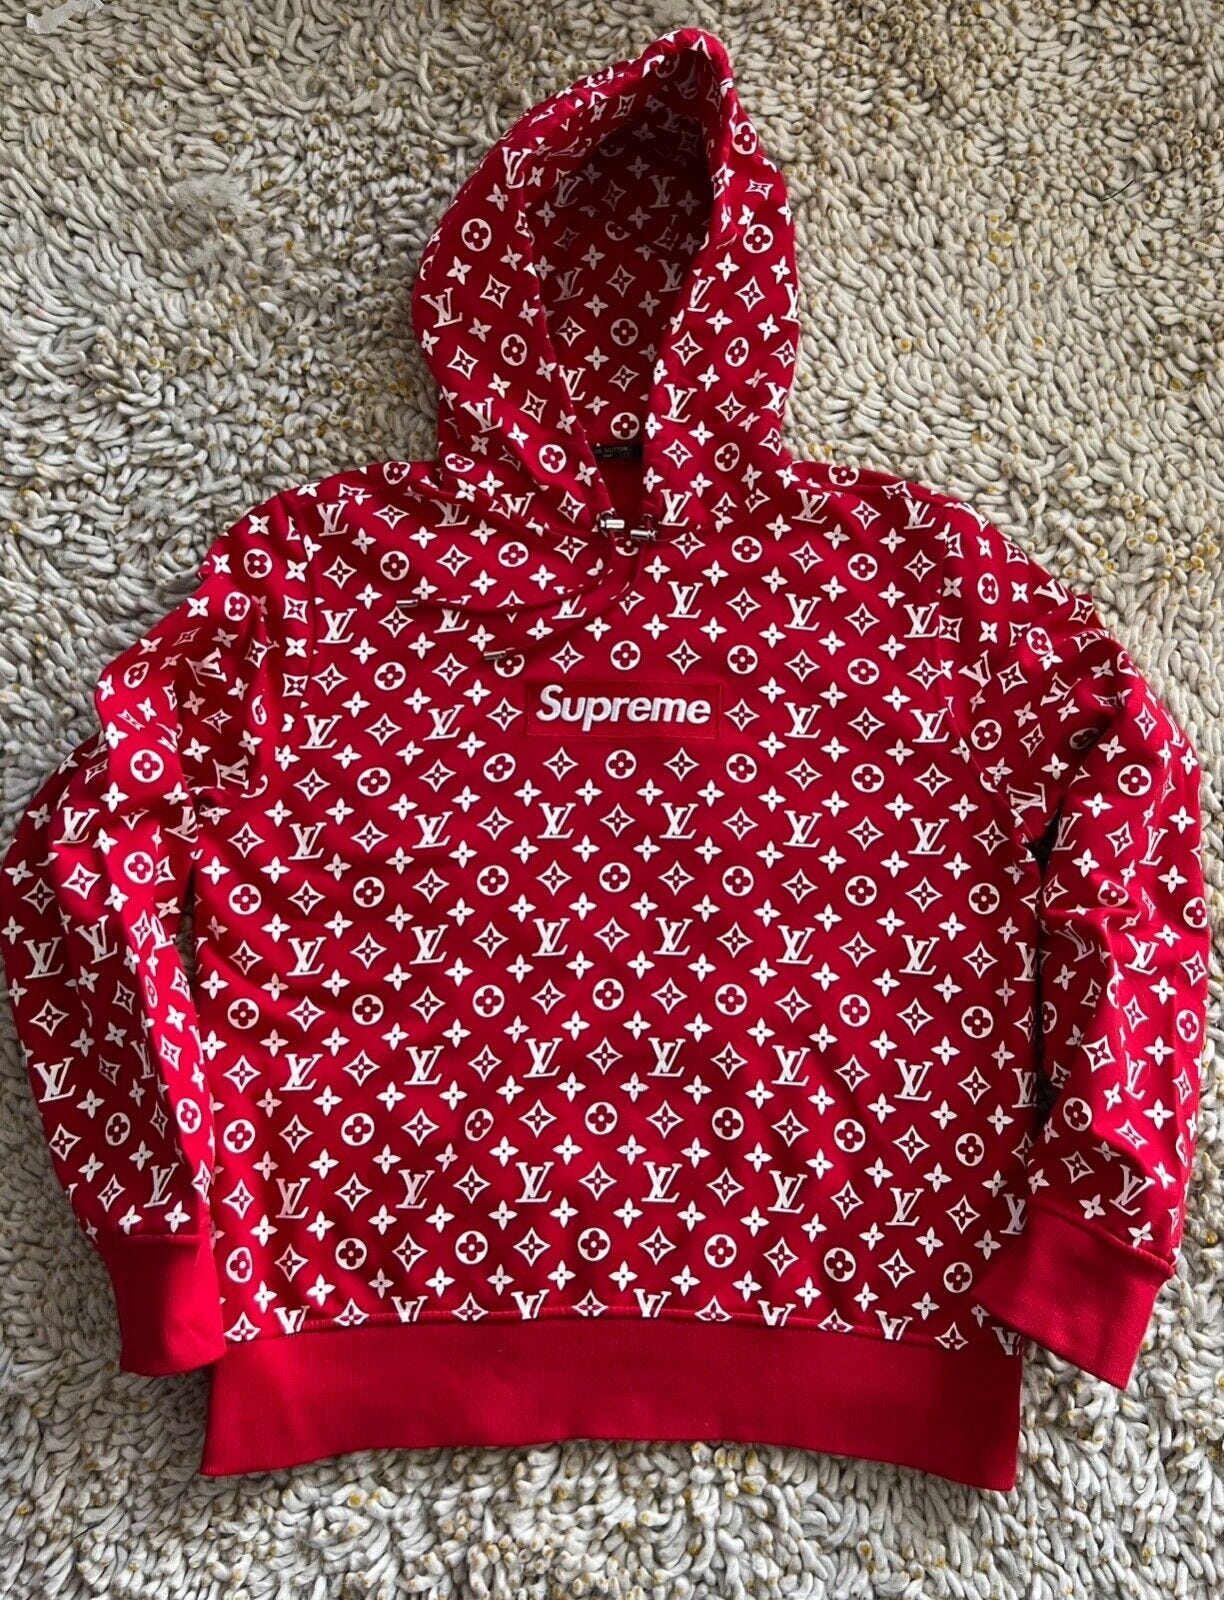 SUPREME LOUIS VUITTON HOODIE 100% AUTHENTIC PRE-OWNED AMAZING CONDITION  AAA+++ | eBay